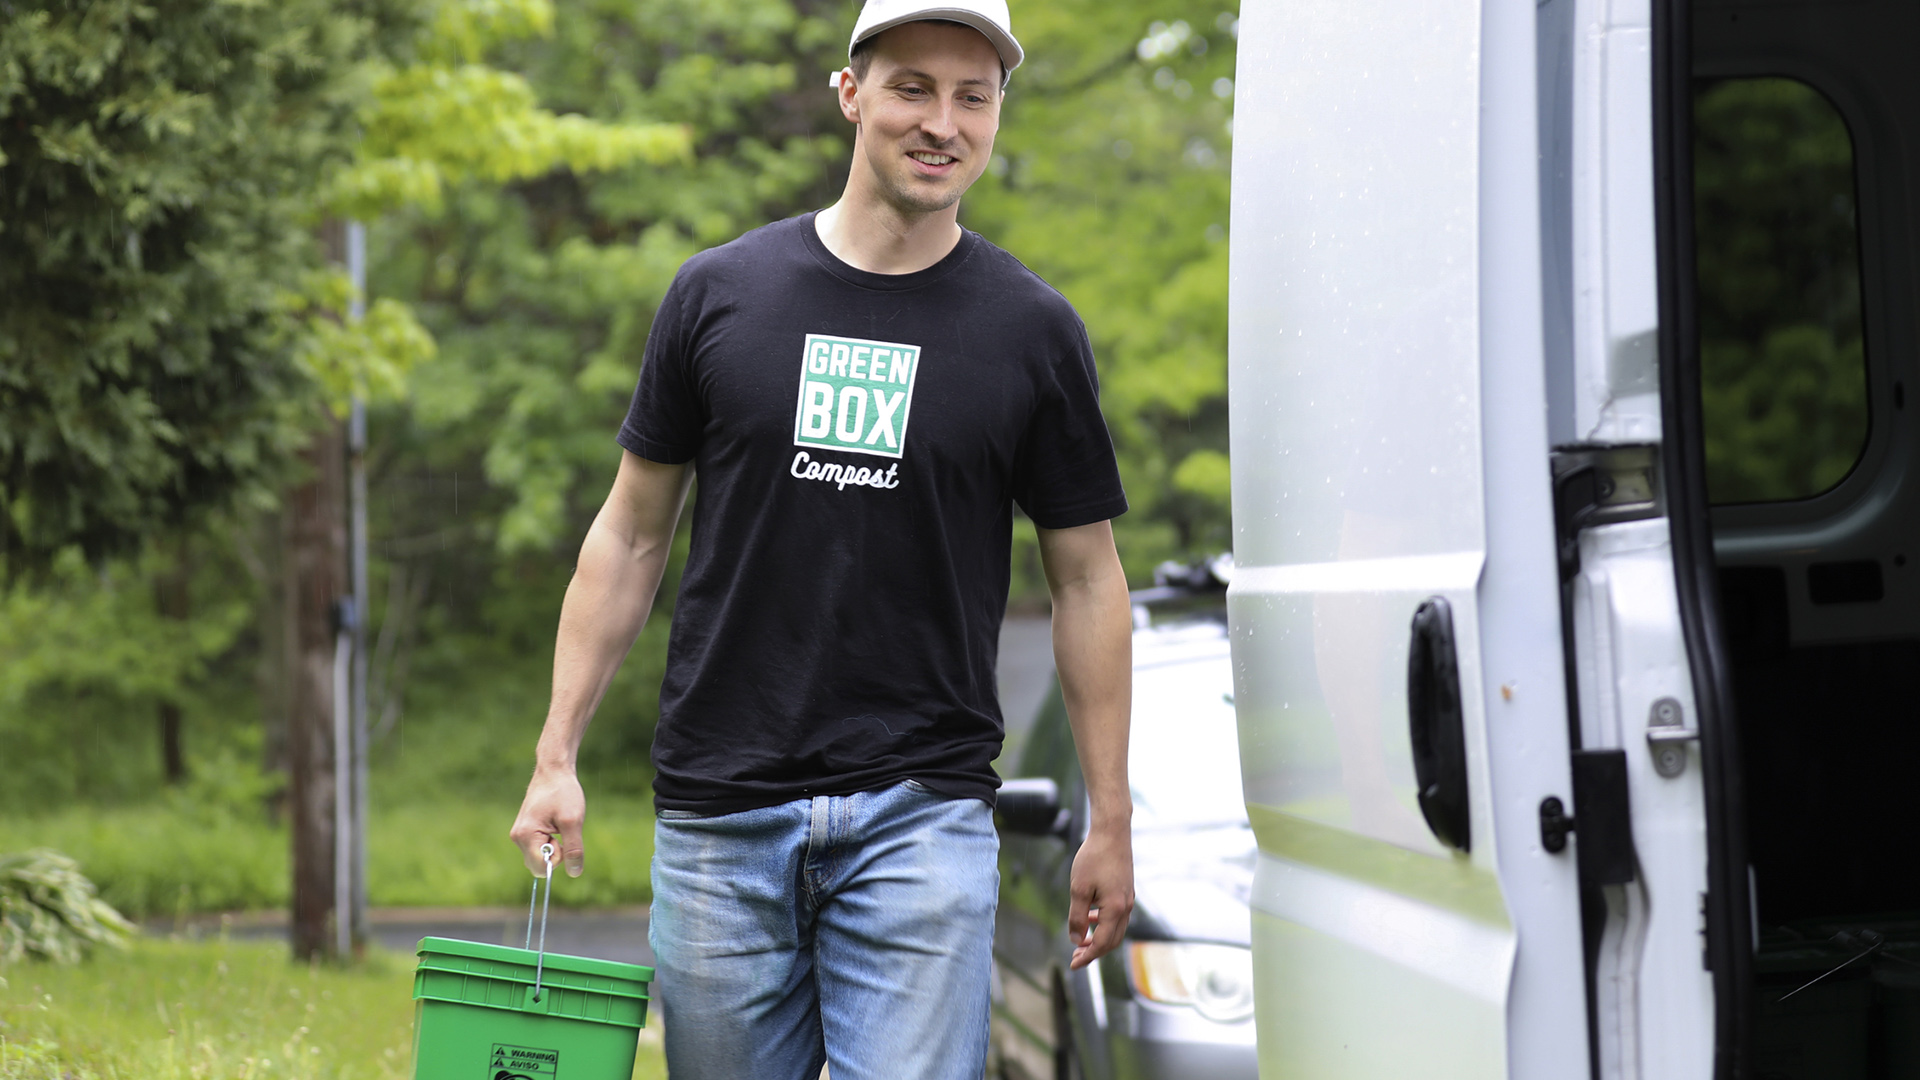 Ben Stanger carries a plastic bucket with a closed top toward the open sliding door of a cargo van, with trees and a parked car in the background.